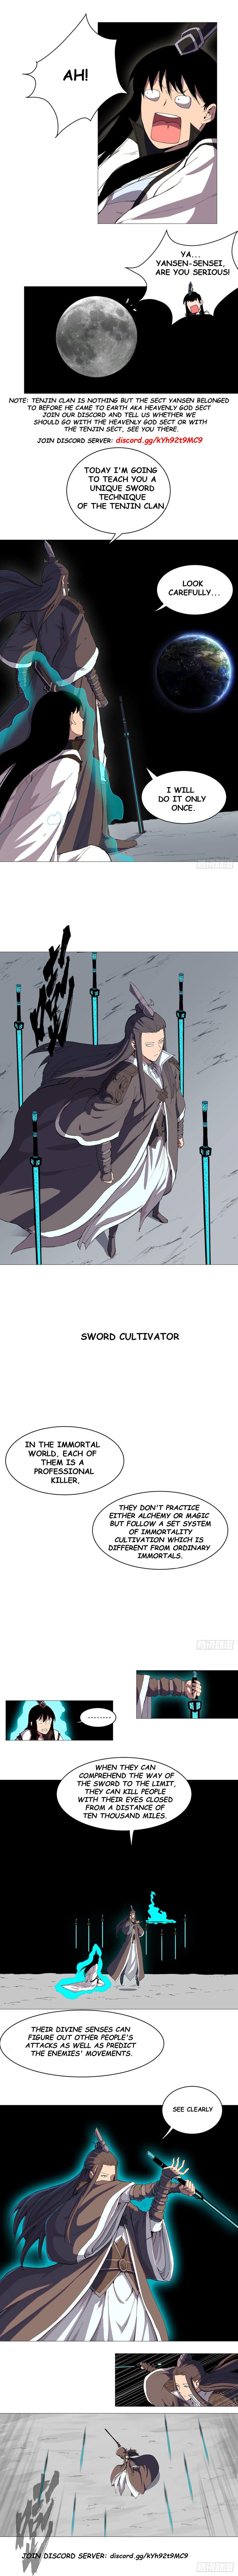 Cultivator Against Hero Society Chapter 94  page 3